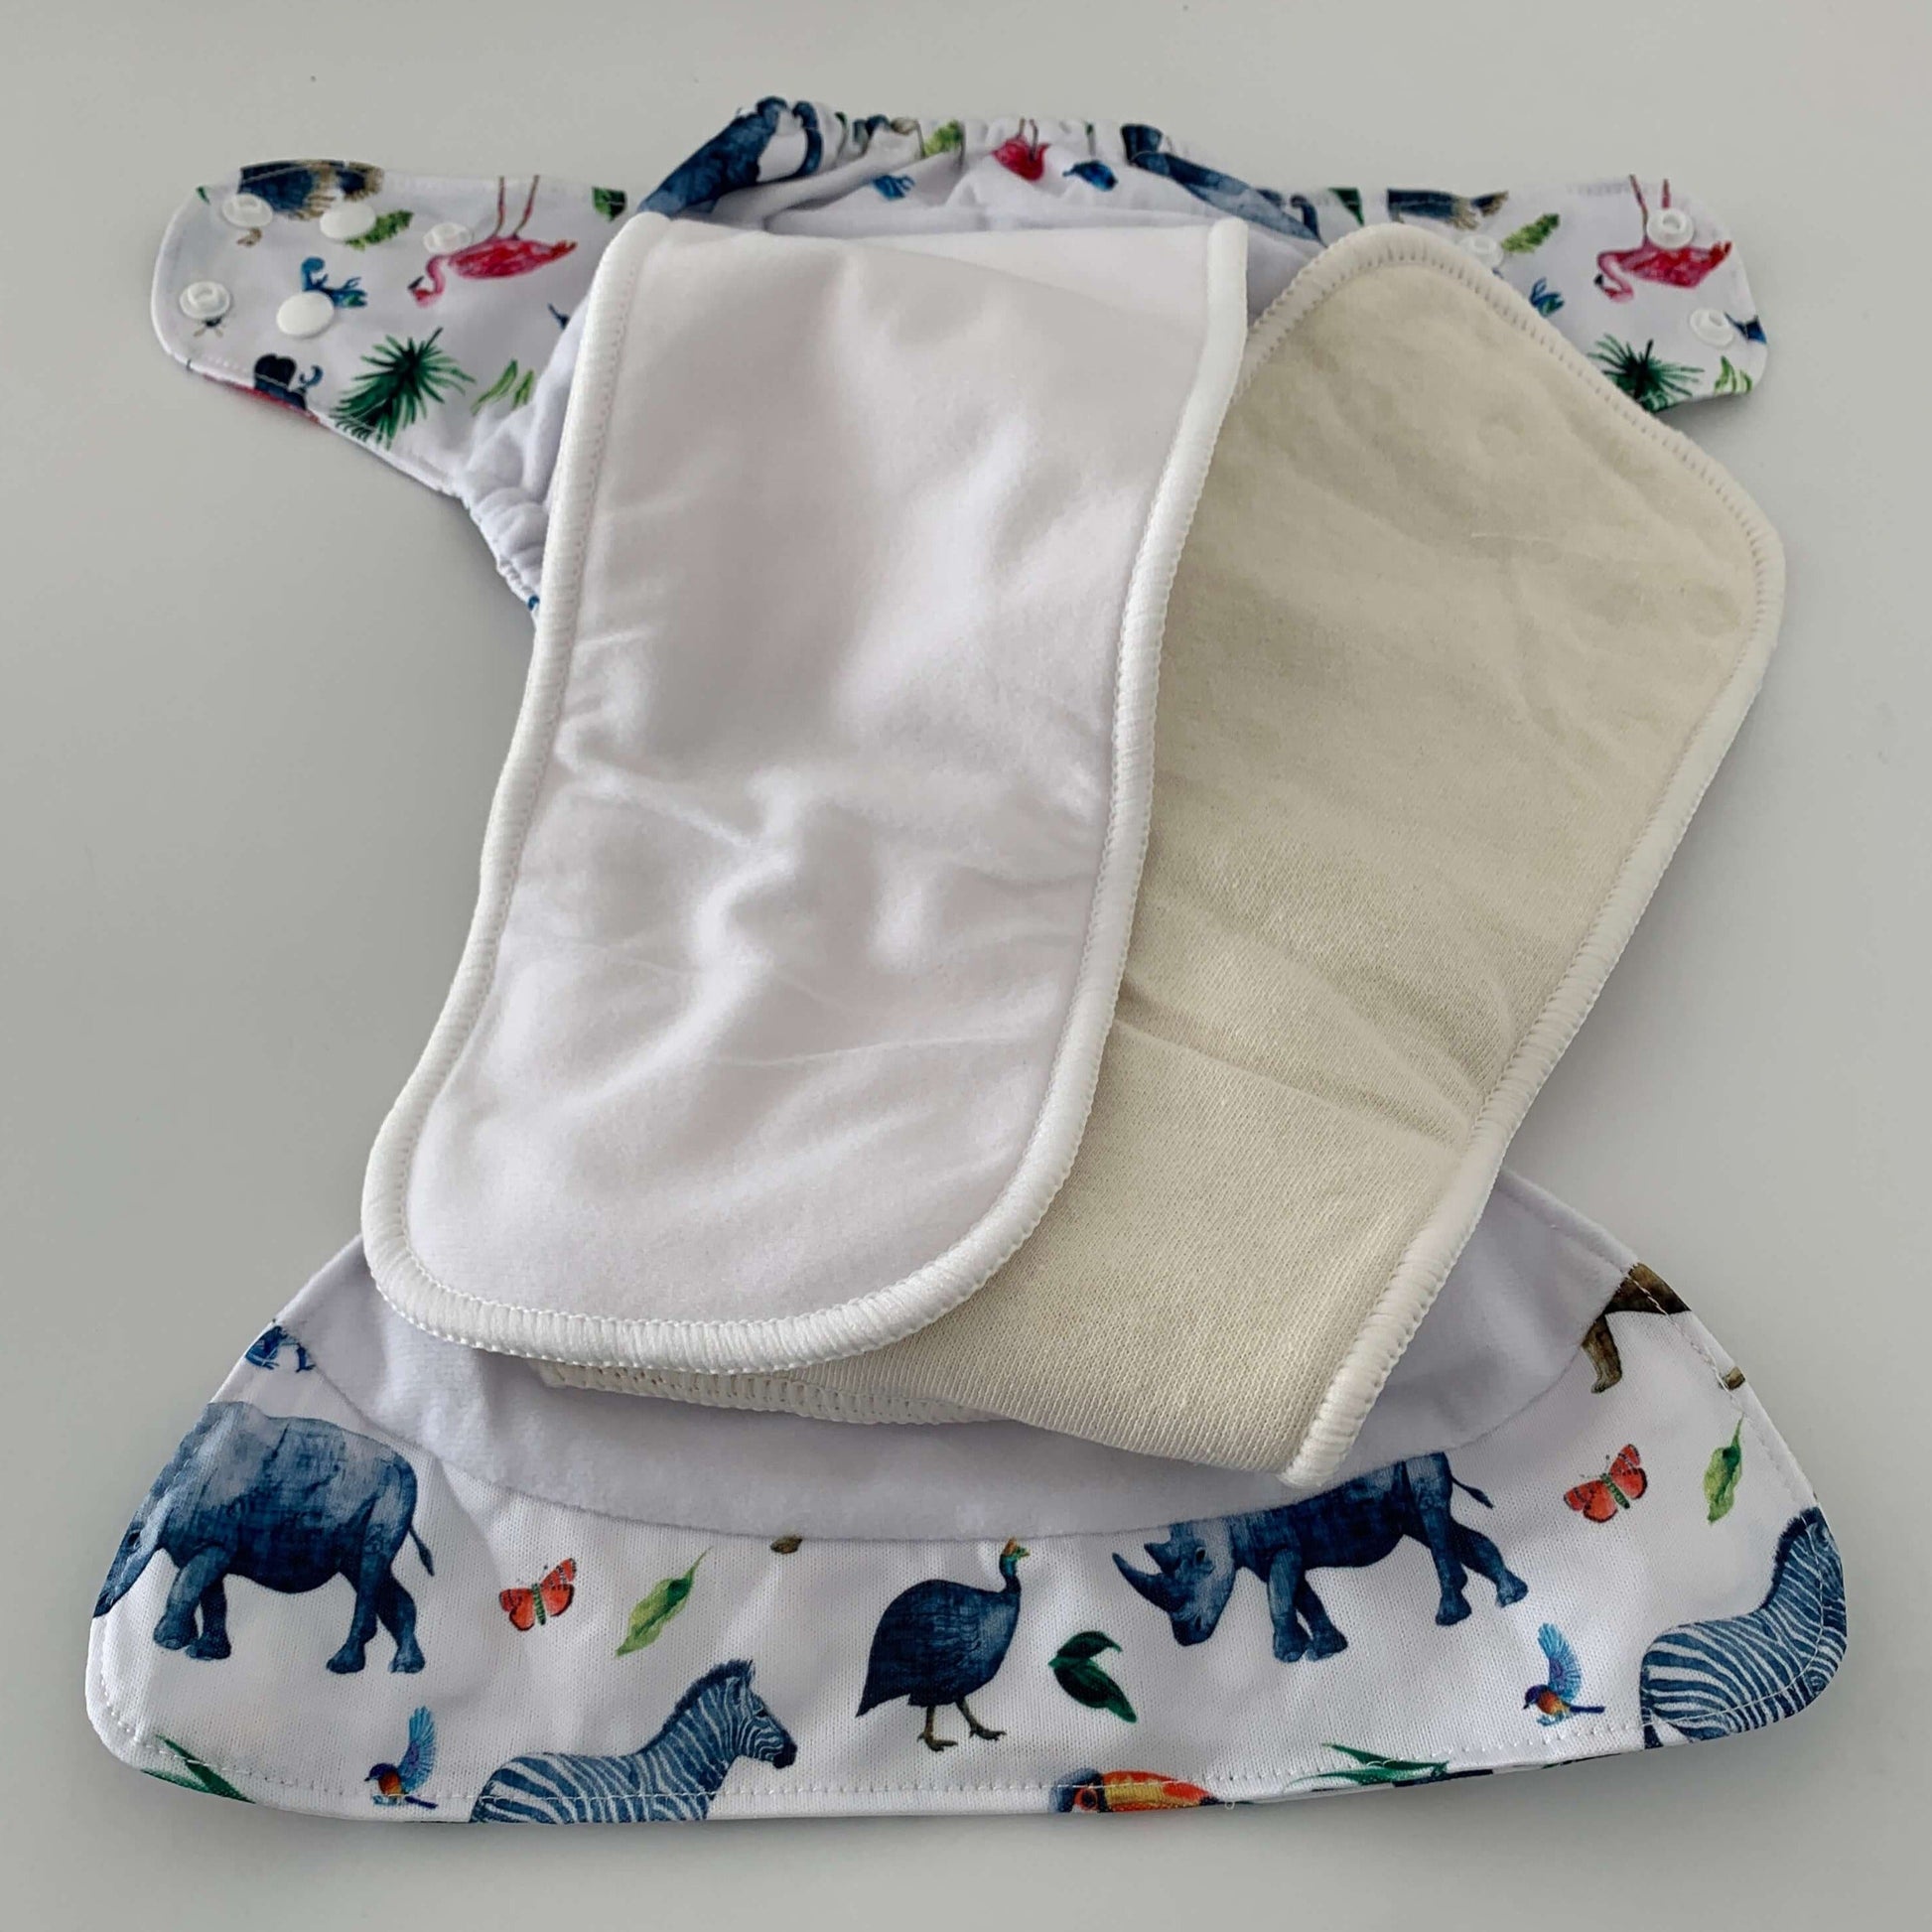 Bear & Moo Luxe Reusable Cloth Nappy Inside | Bamboo and Hemp Liners